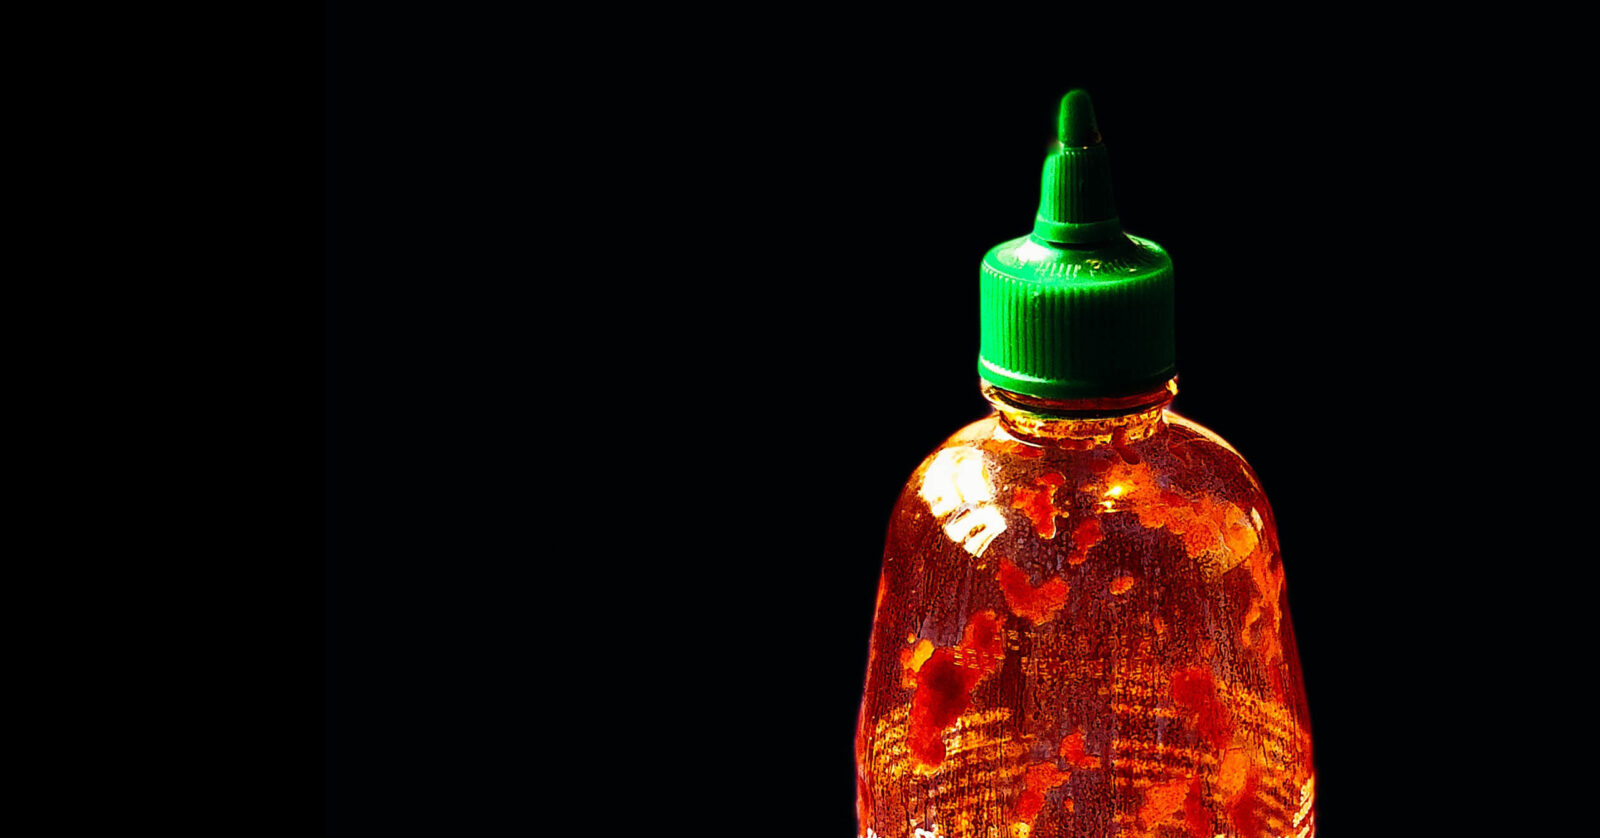 Why is the better Sriracha (Huy Fong) losing the swiss chili-sauce